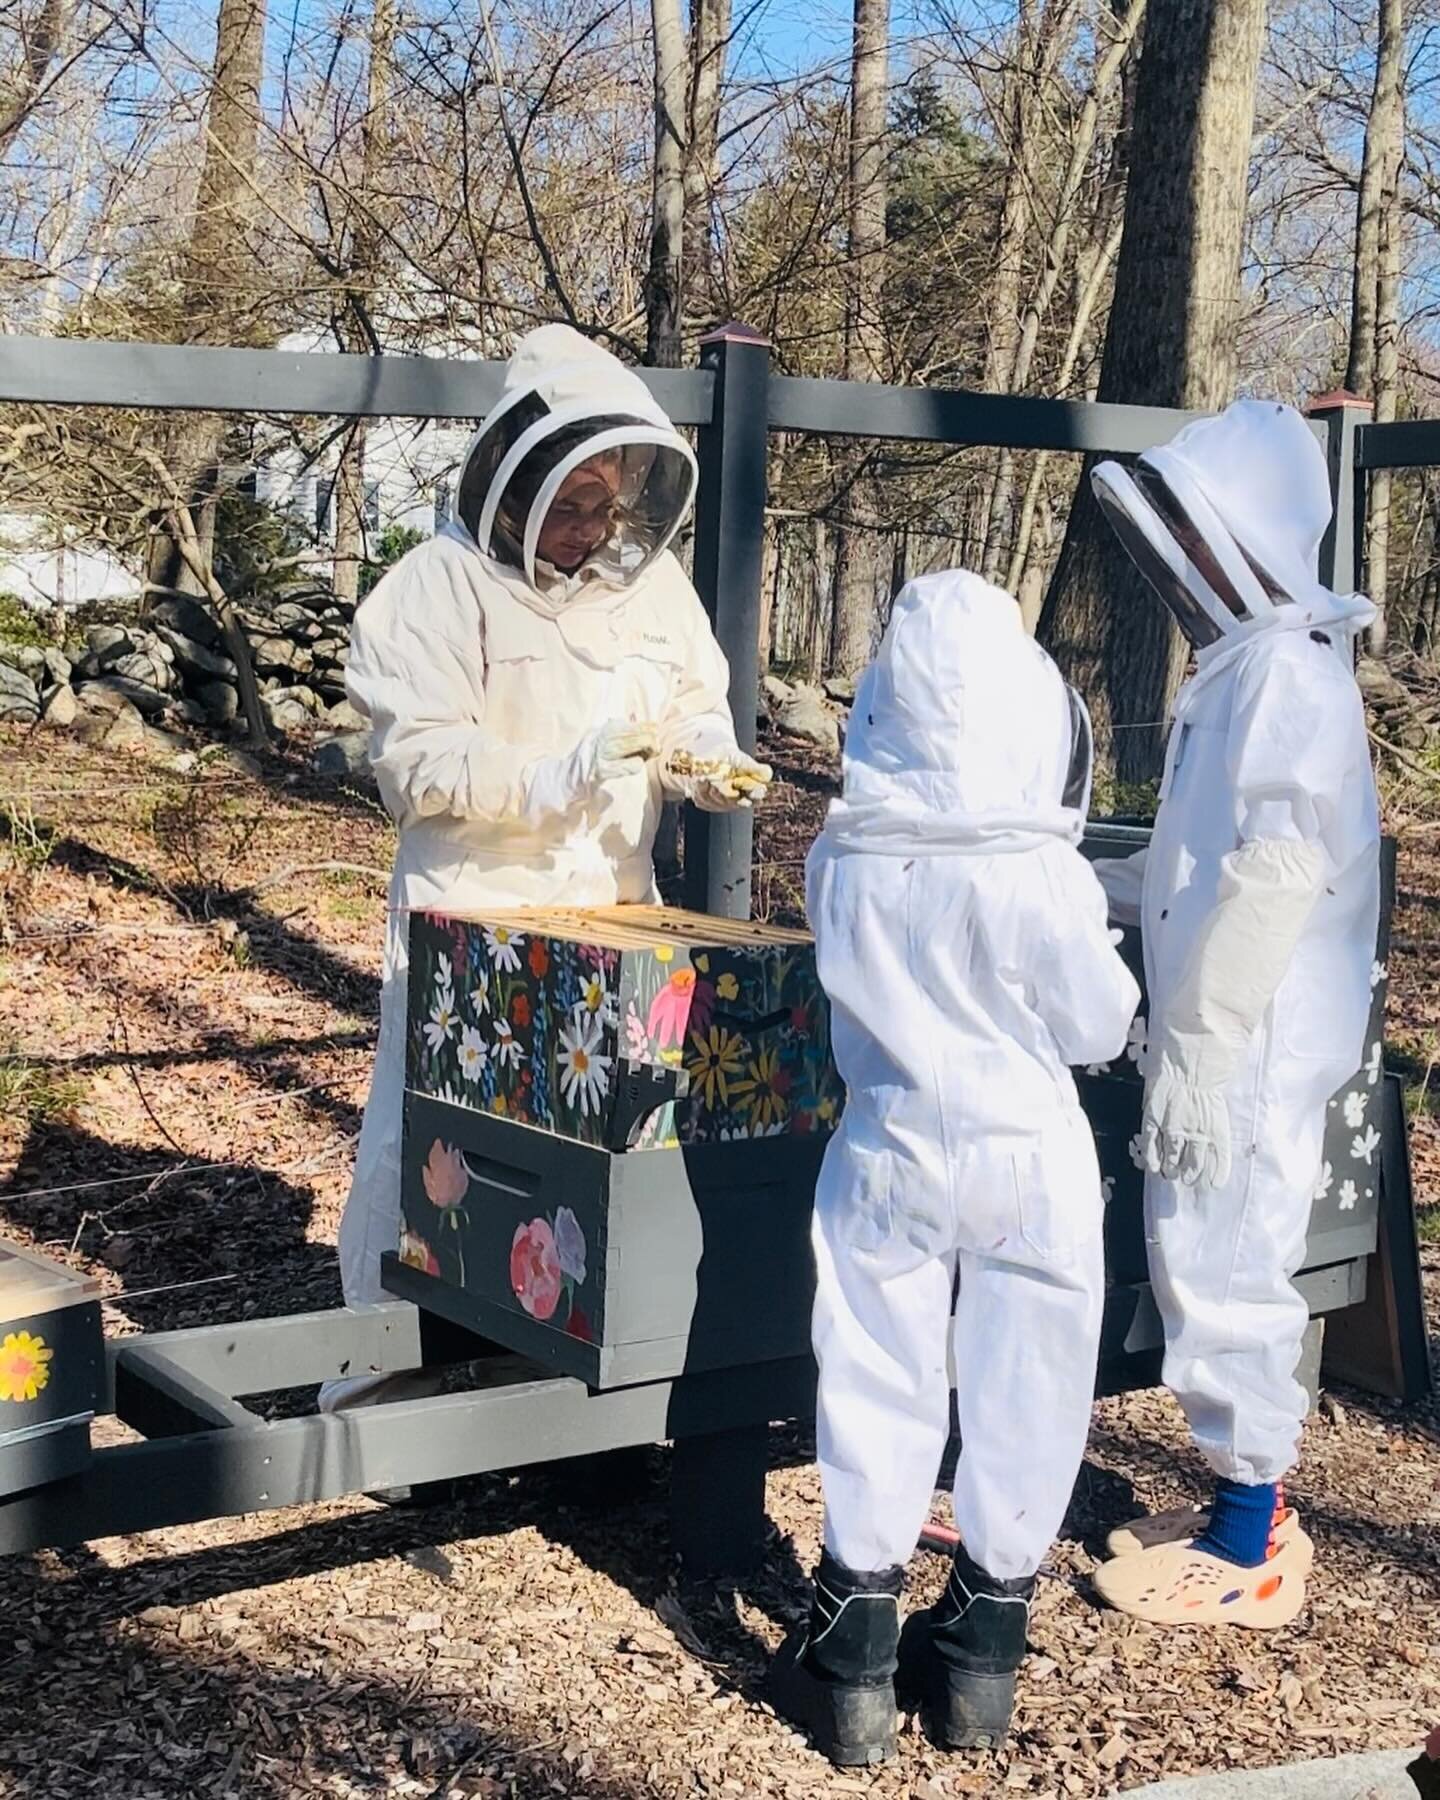 Hung out with around 30,000 bees today! Our hives are installed and we are hoping for the best this season 🐝🌷😍 #beekeeping #bees #savethebees